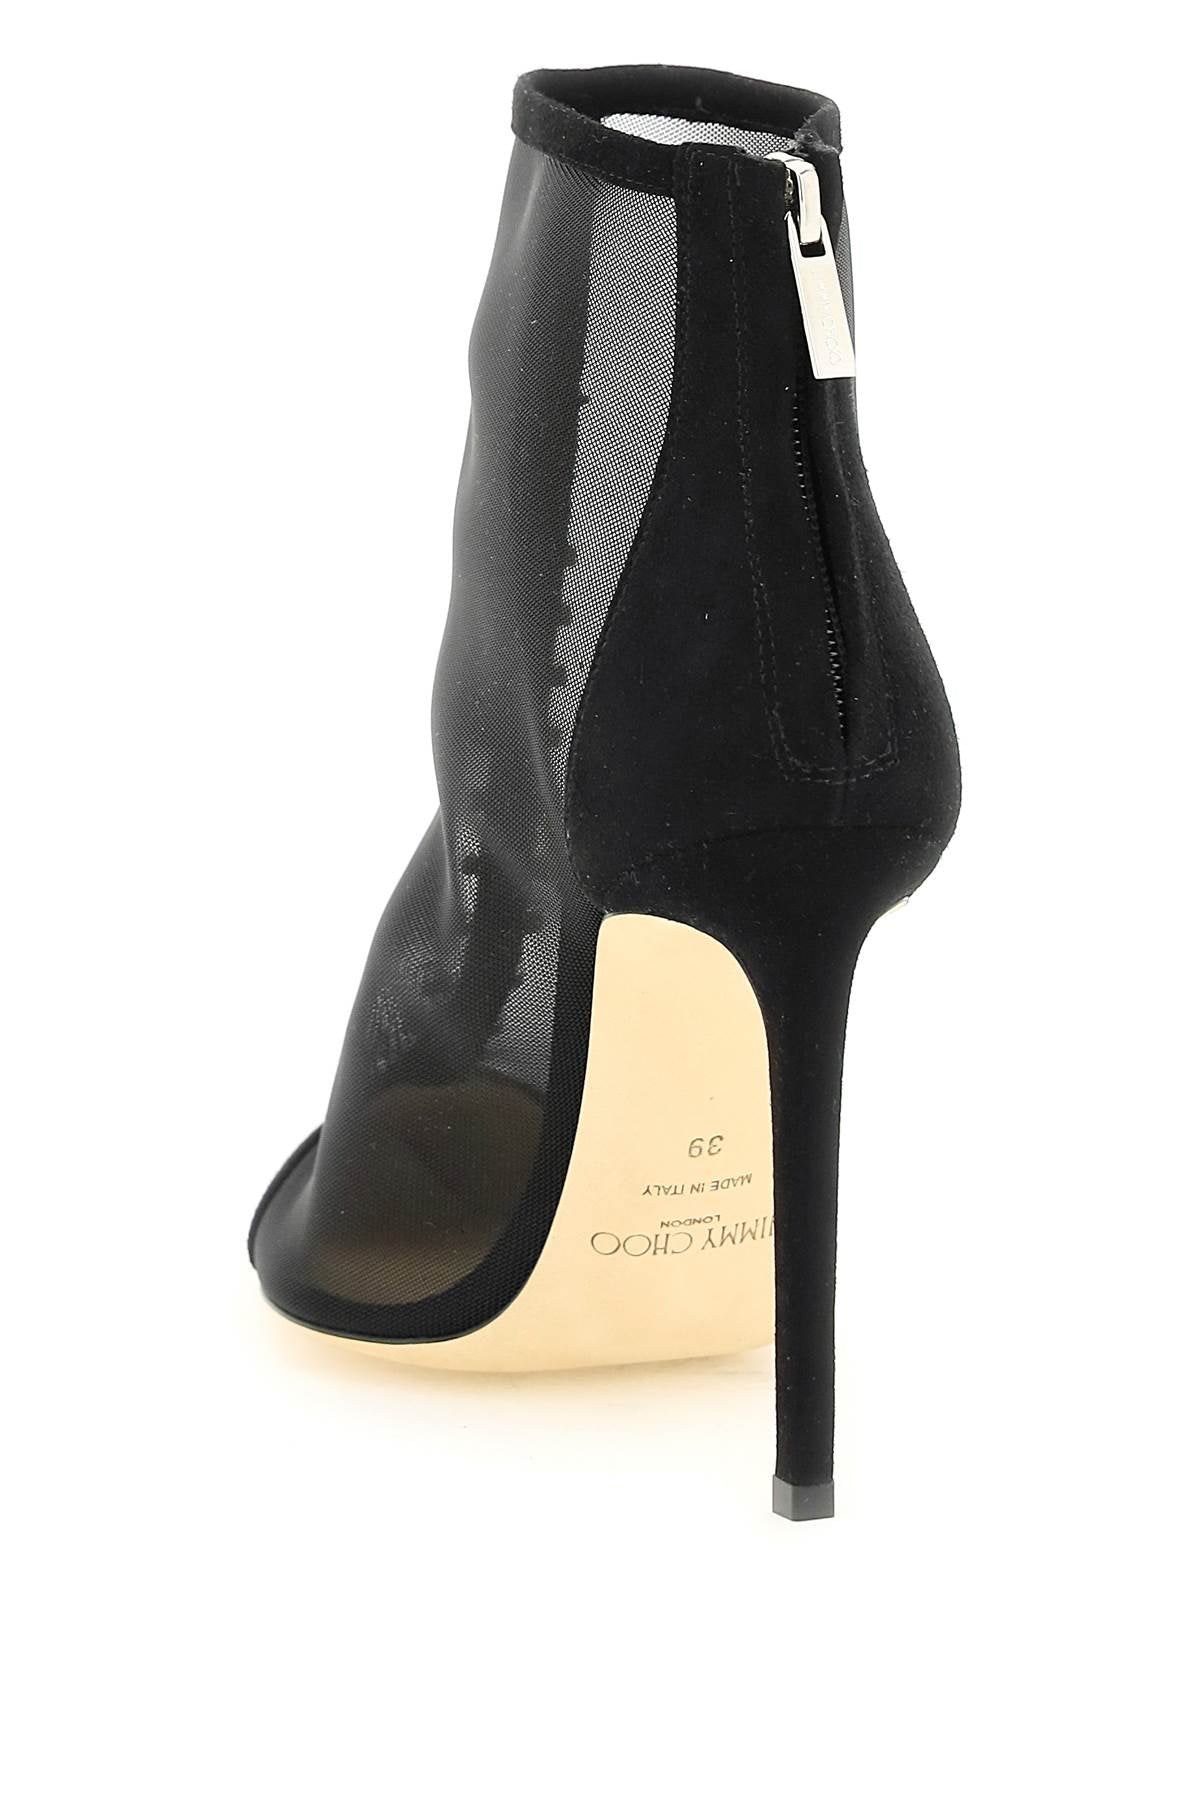 JIMMY CHOO Stunning Black Ankle Boots for Women by Luxury Fashion Brand